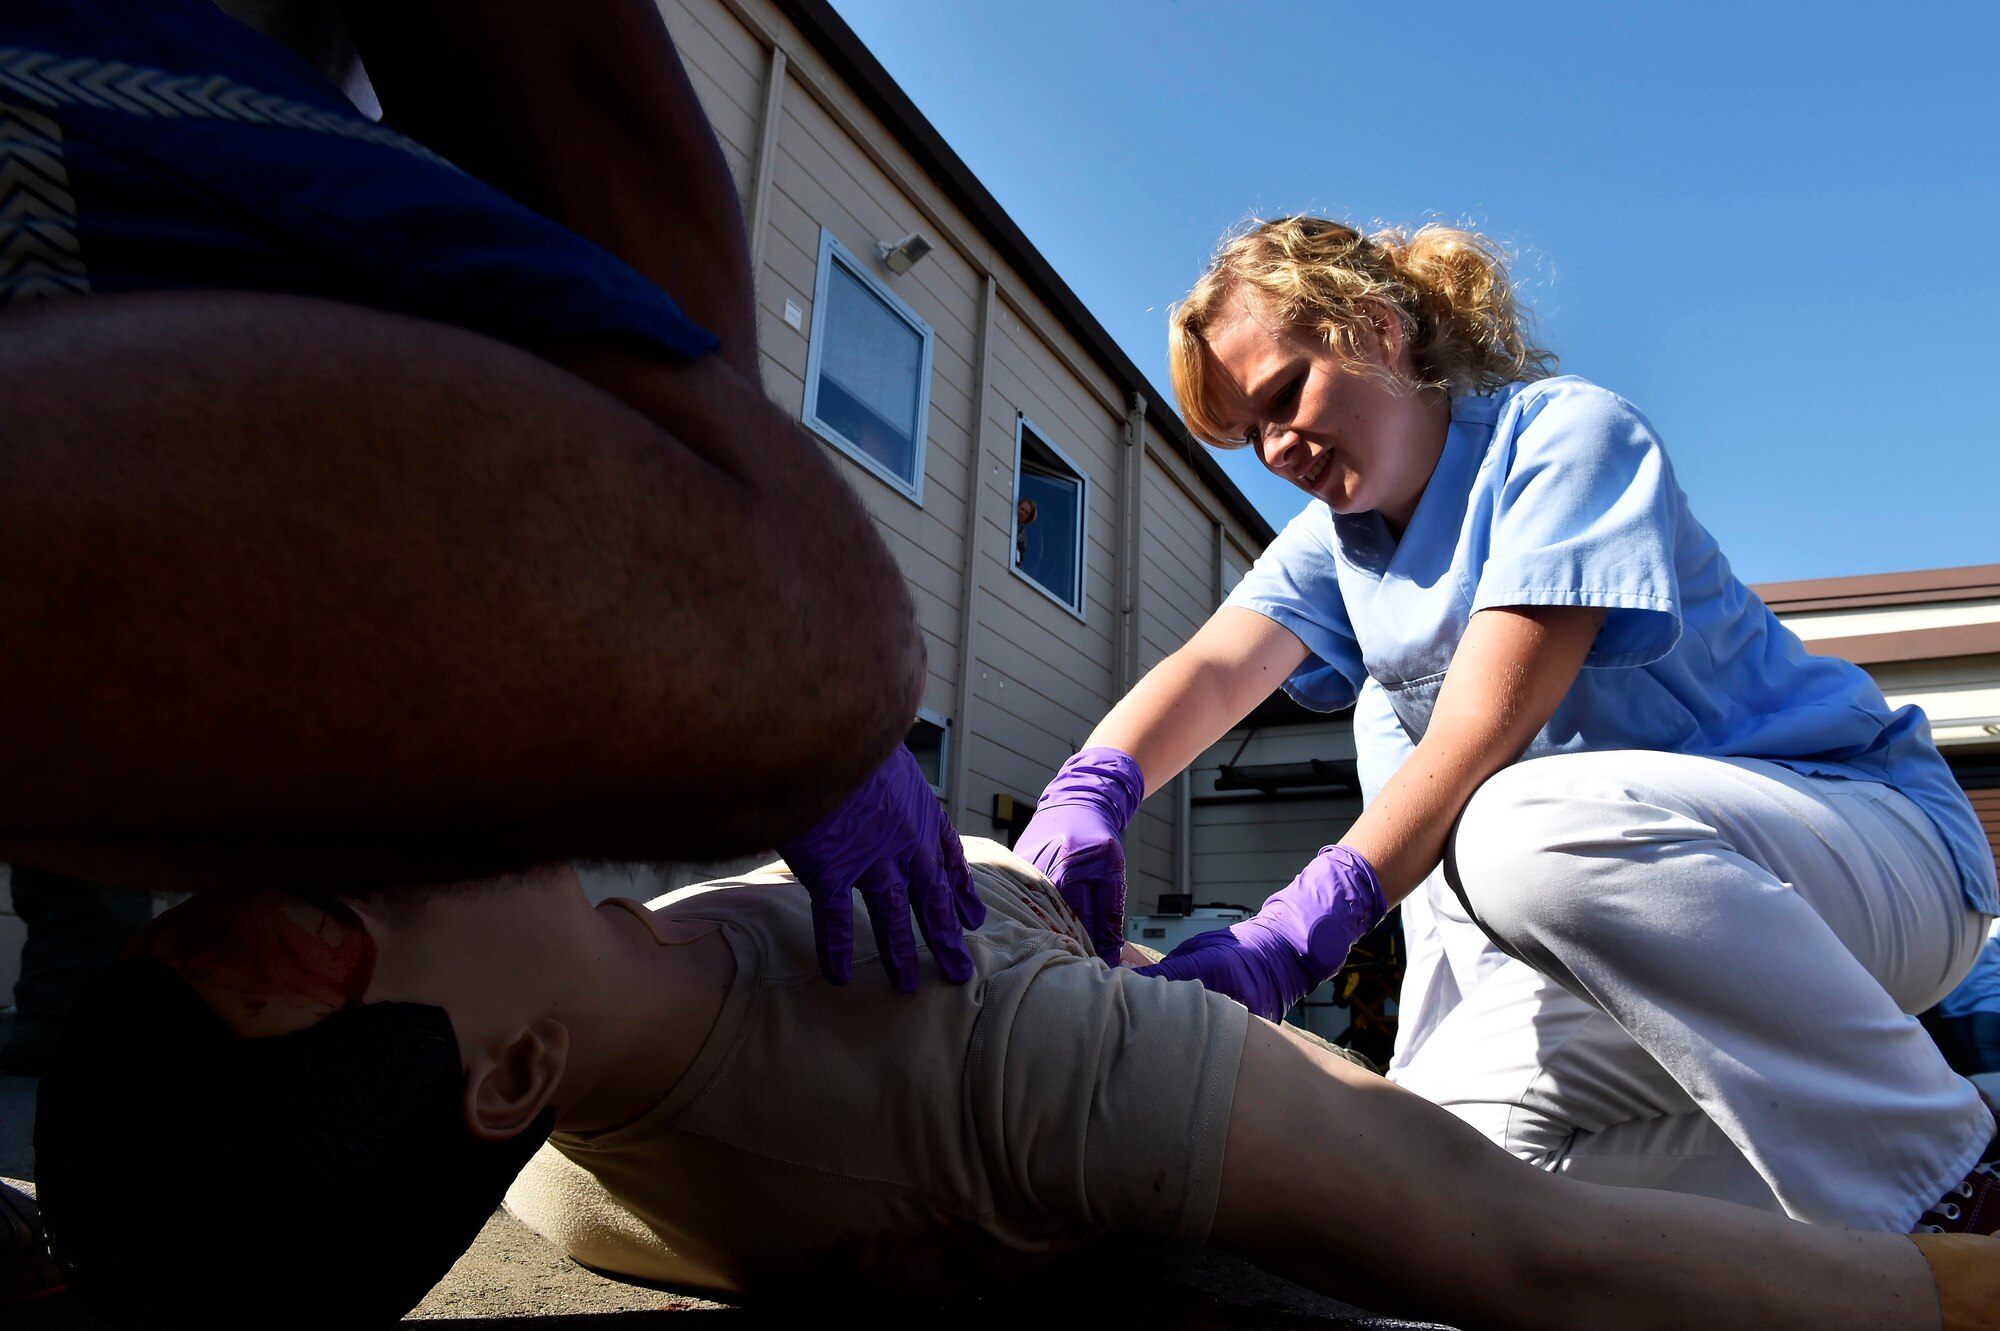 A nursing student from Caritas SchulZentrum St. Hildegard, Saarbrücken, Germany, works with 86th Aeromedical Evacuation Squadron medics in a simulated mass casualty scenario at Ramstein Air Base, Germany, Sept. 13, 2016. The scenario included five simulated casualties who needed treatment ranging from a broken femur to severed limbs. (U.S. Air Force photo by Senior Airman Jonathan Bass)